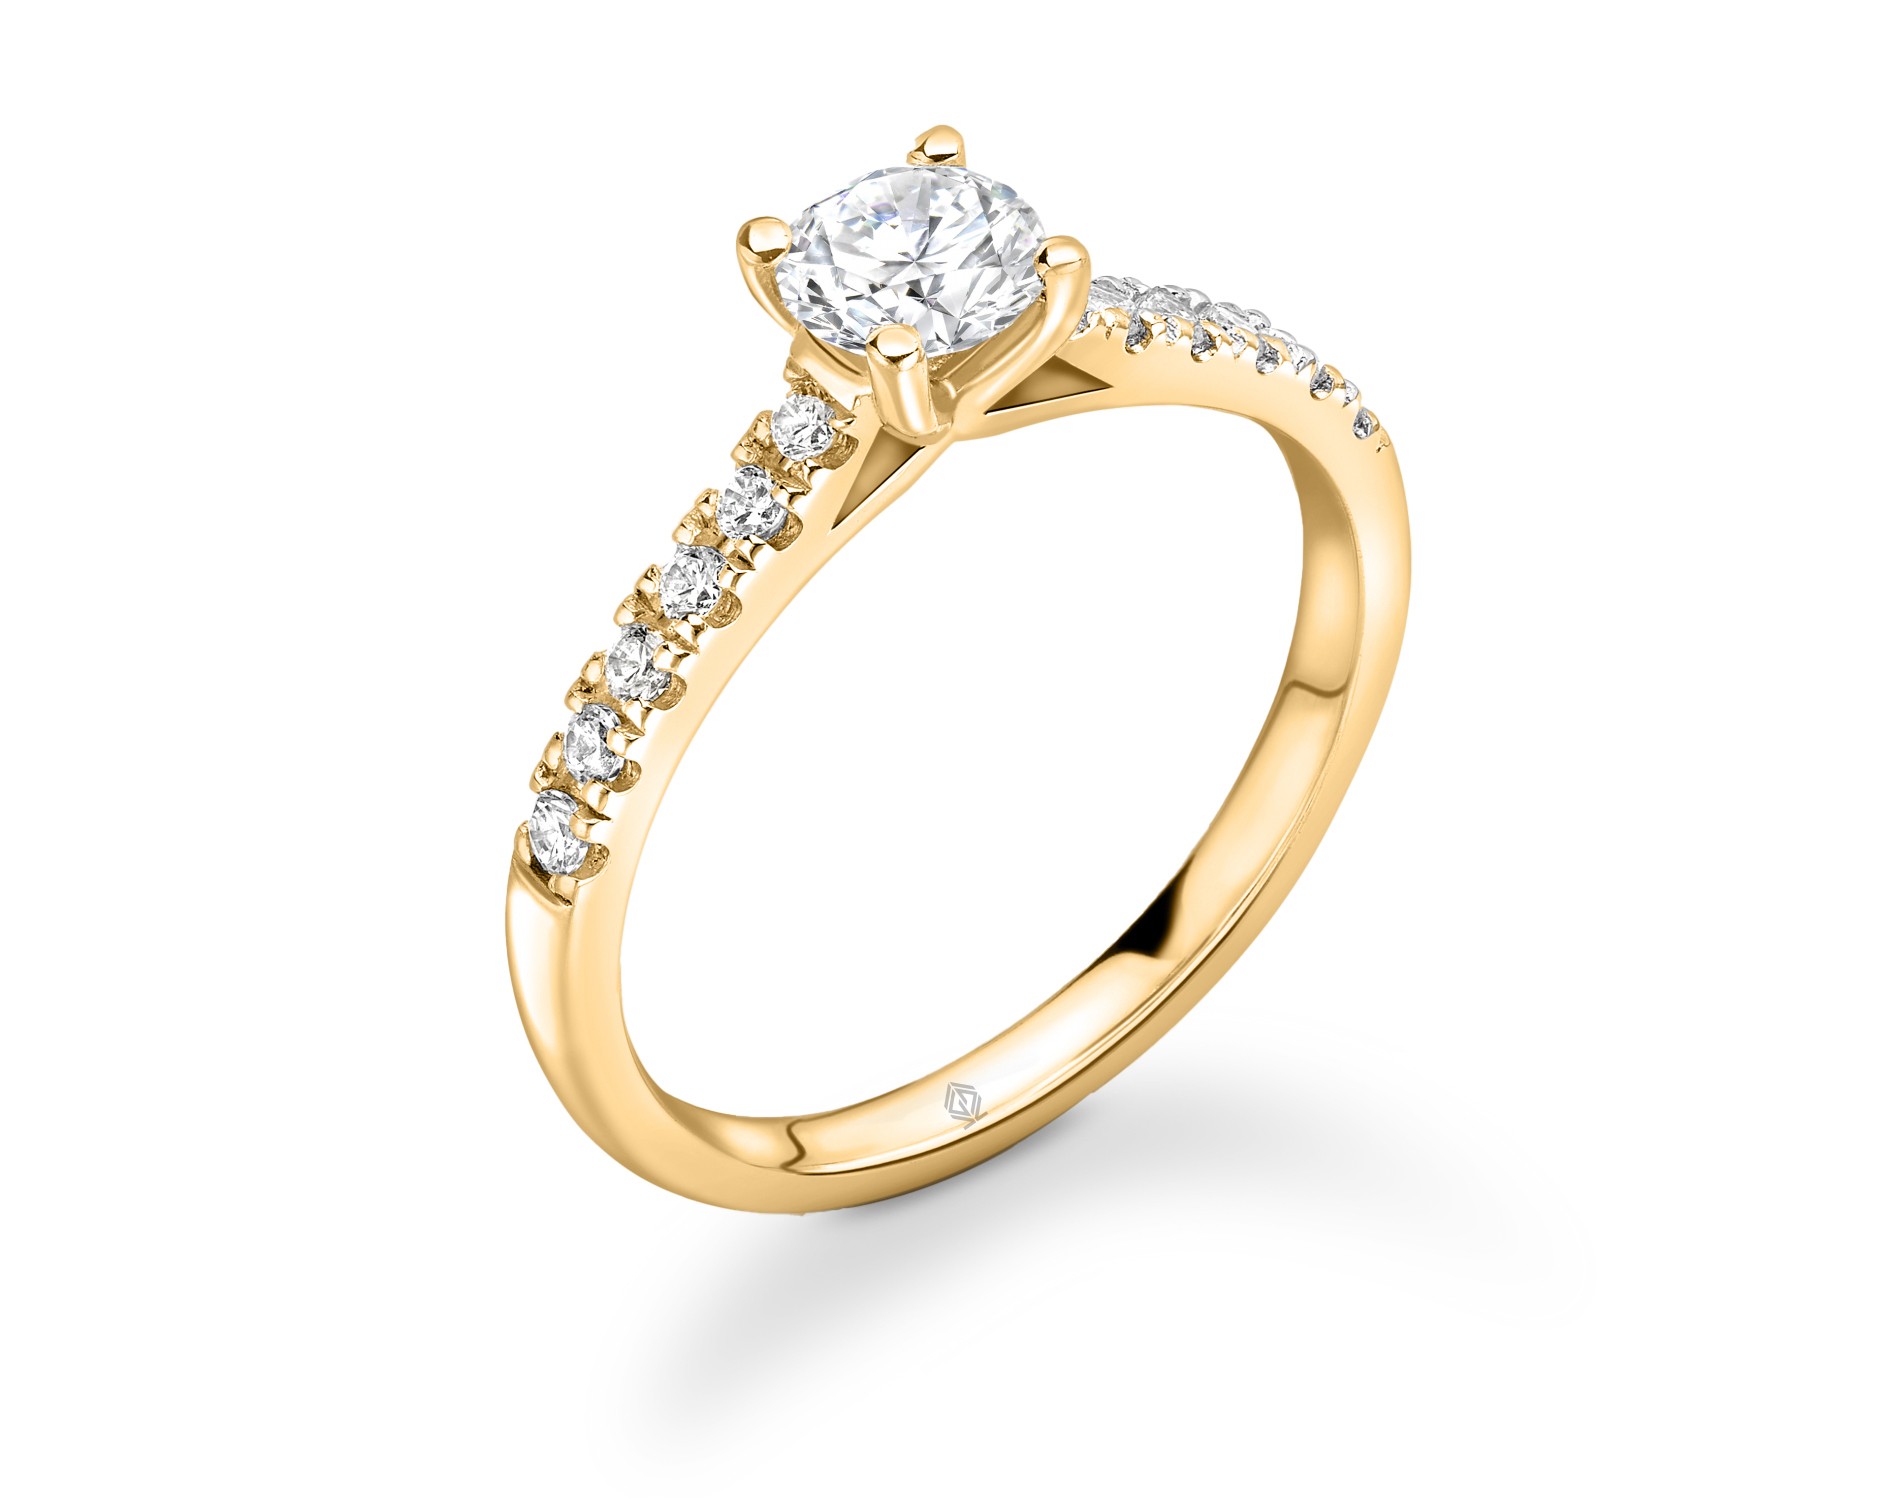 18K YELLOW GOLD ROUND CUT 4 PRONGS DIAMOND ENGAGEMENT RING WITH PAVE SET